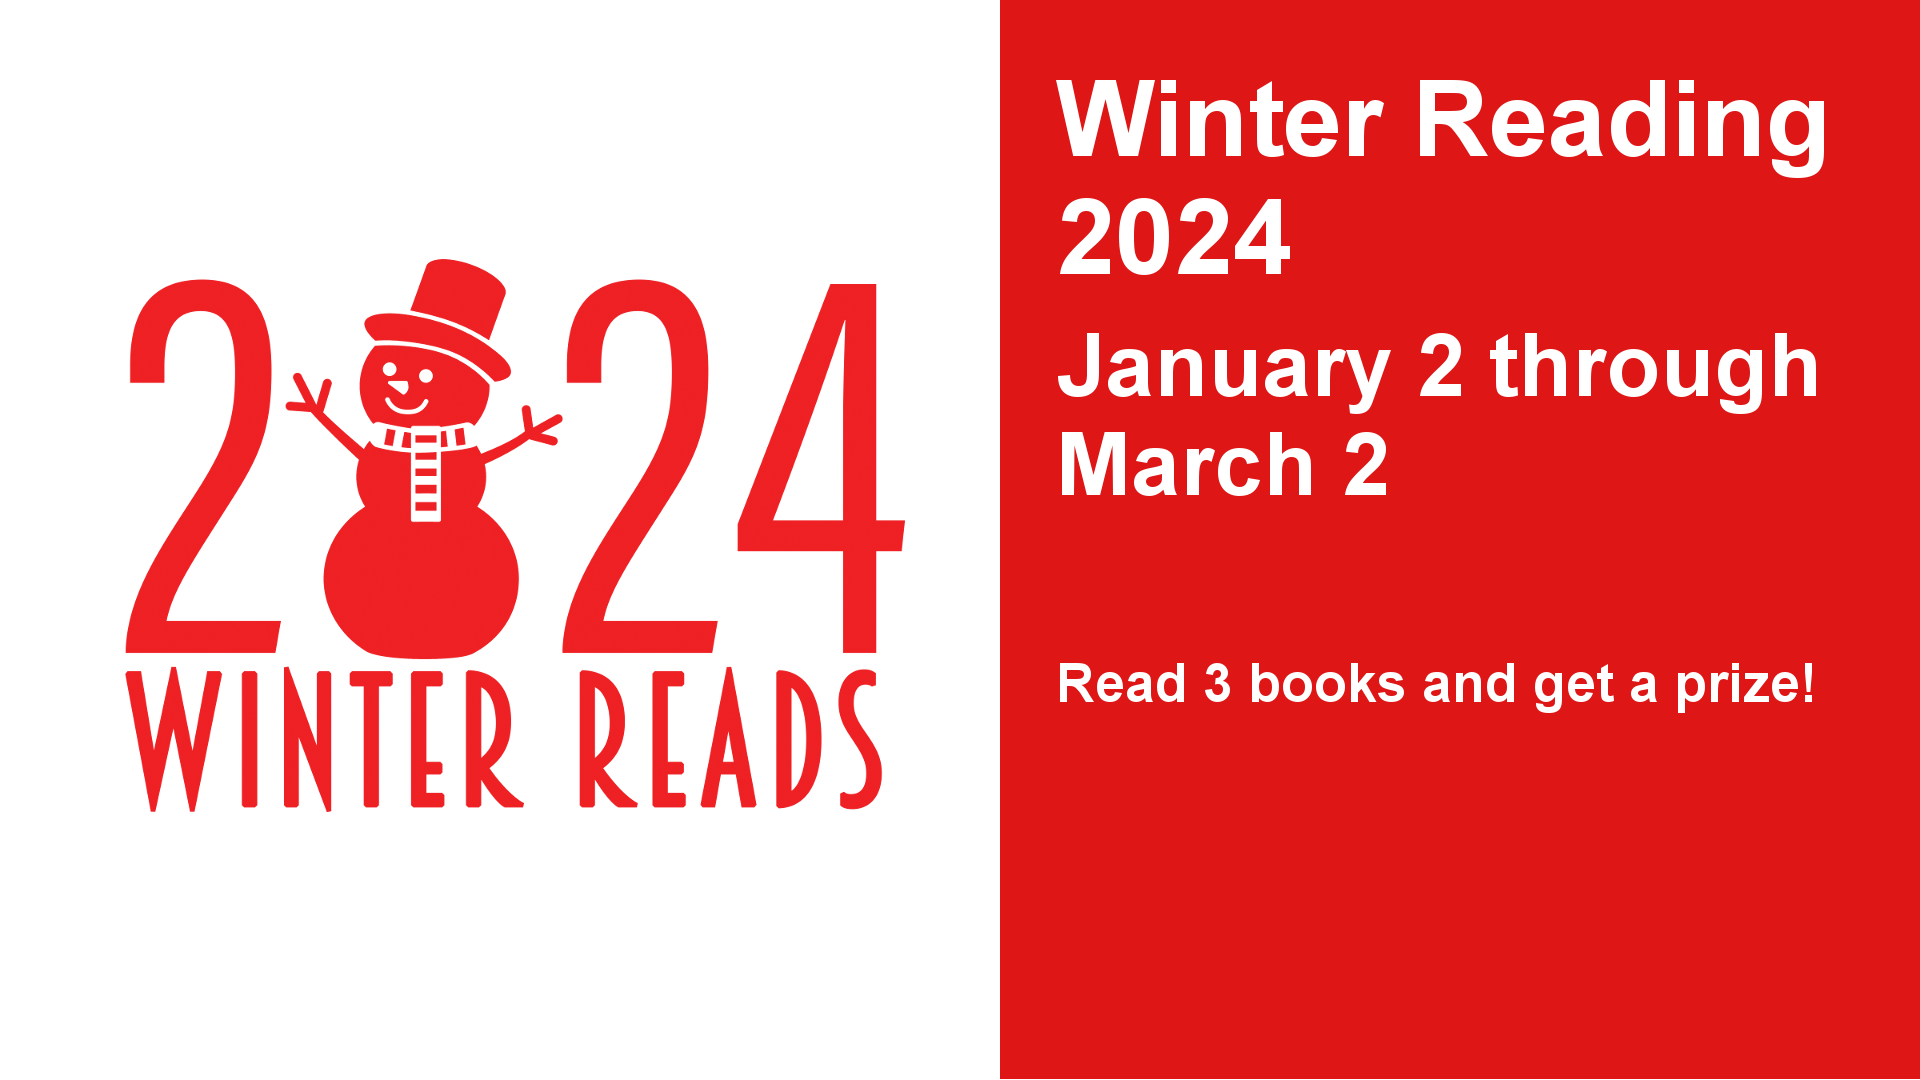 Winter Reading 2024

January 2 through March 2

Read 3 books and get a prize!